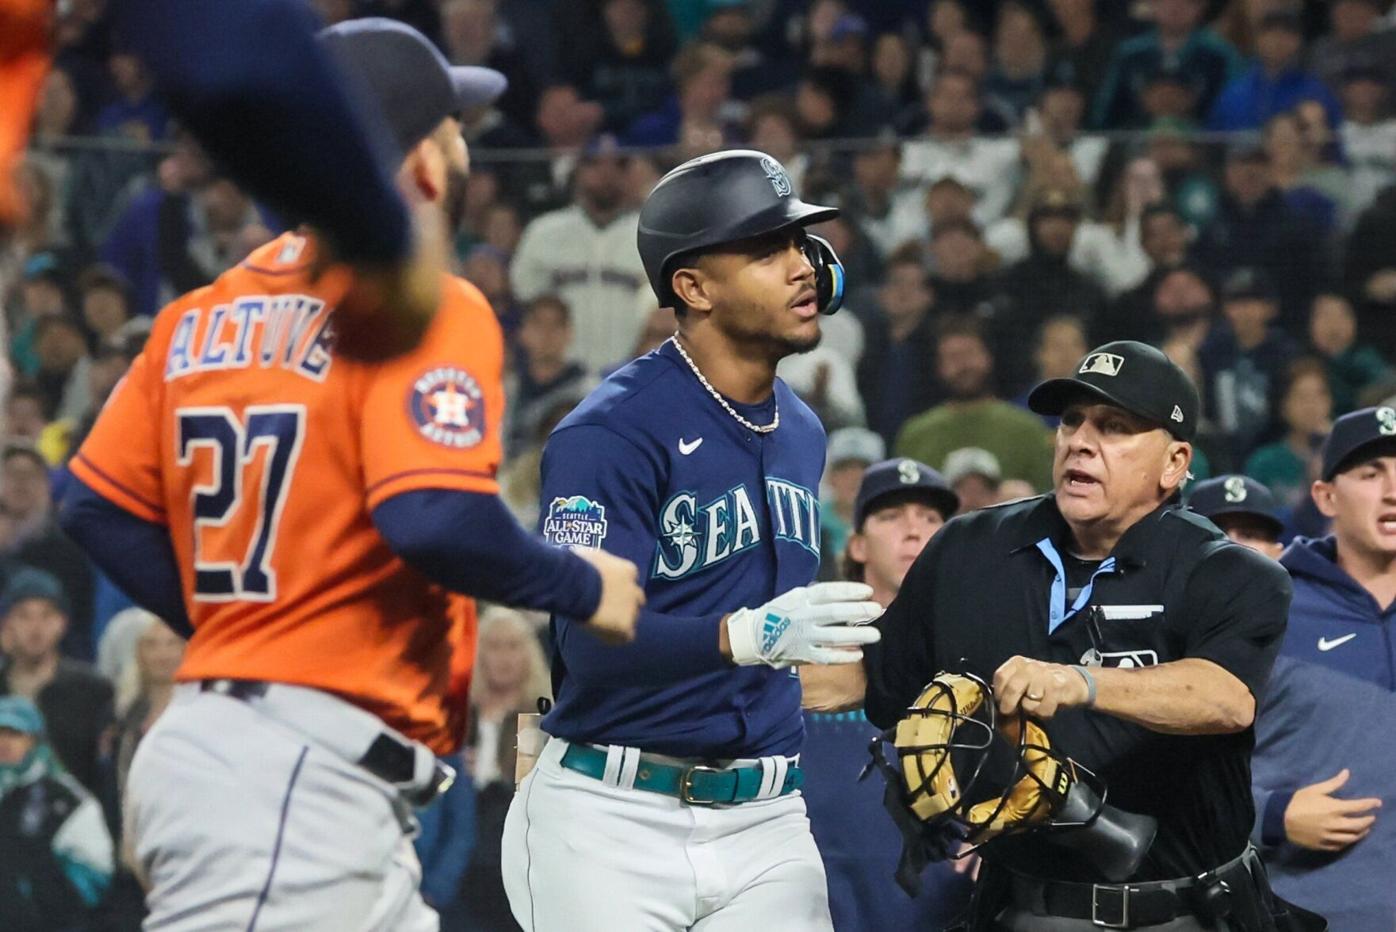 A year after ending playoff drought, Mariners left frustrated about falling  short, National Sports